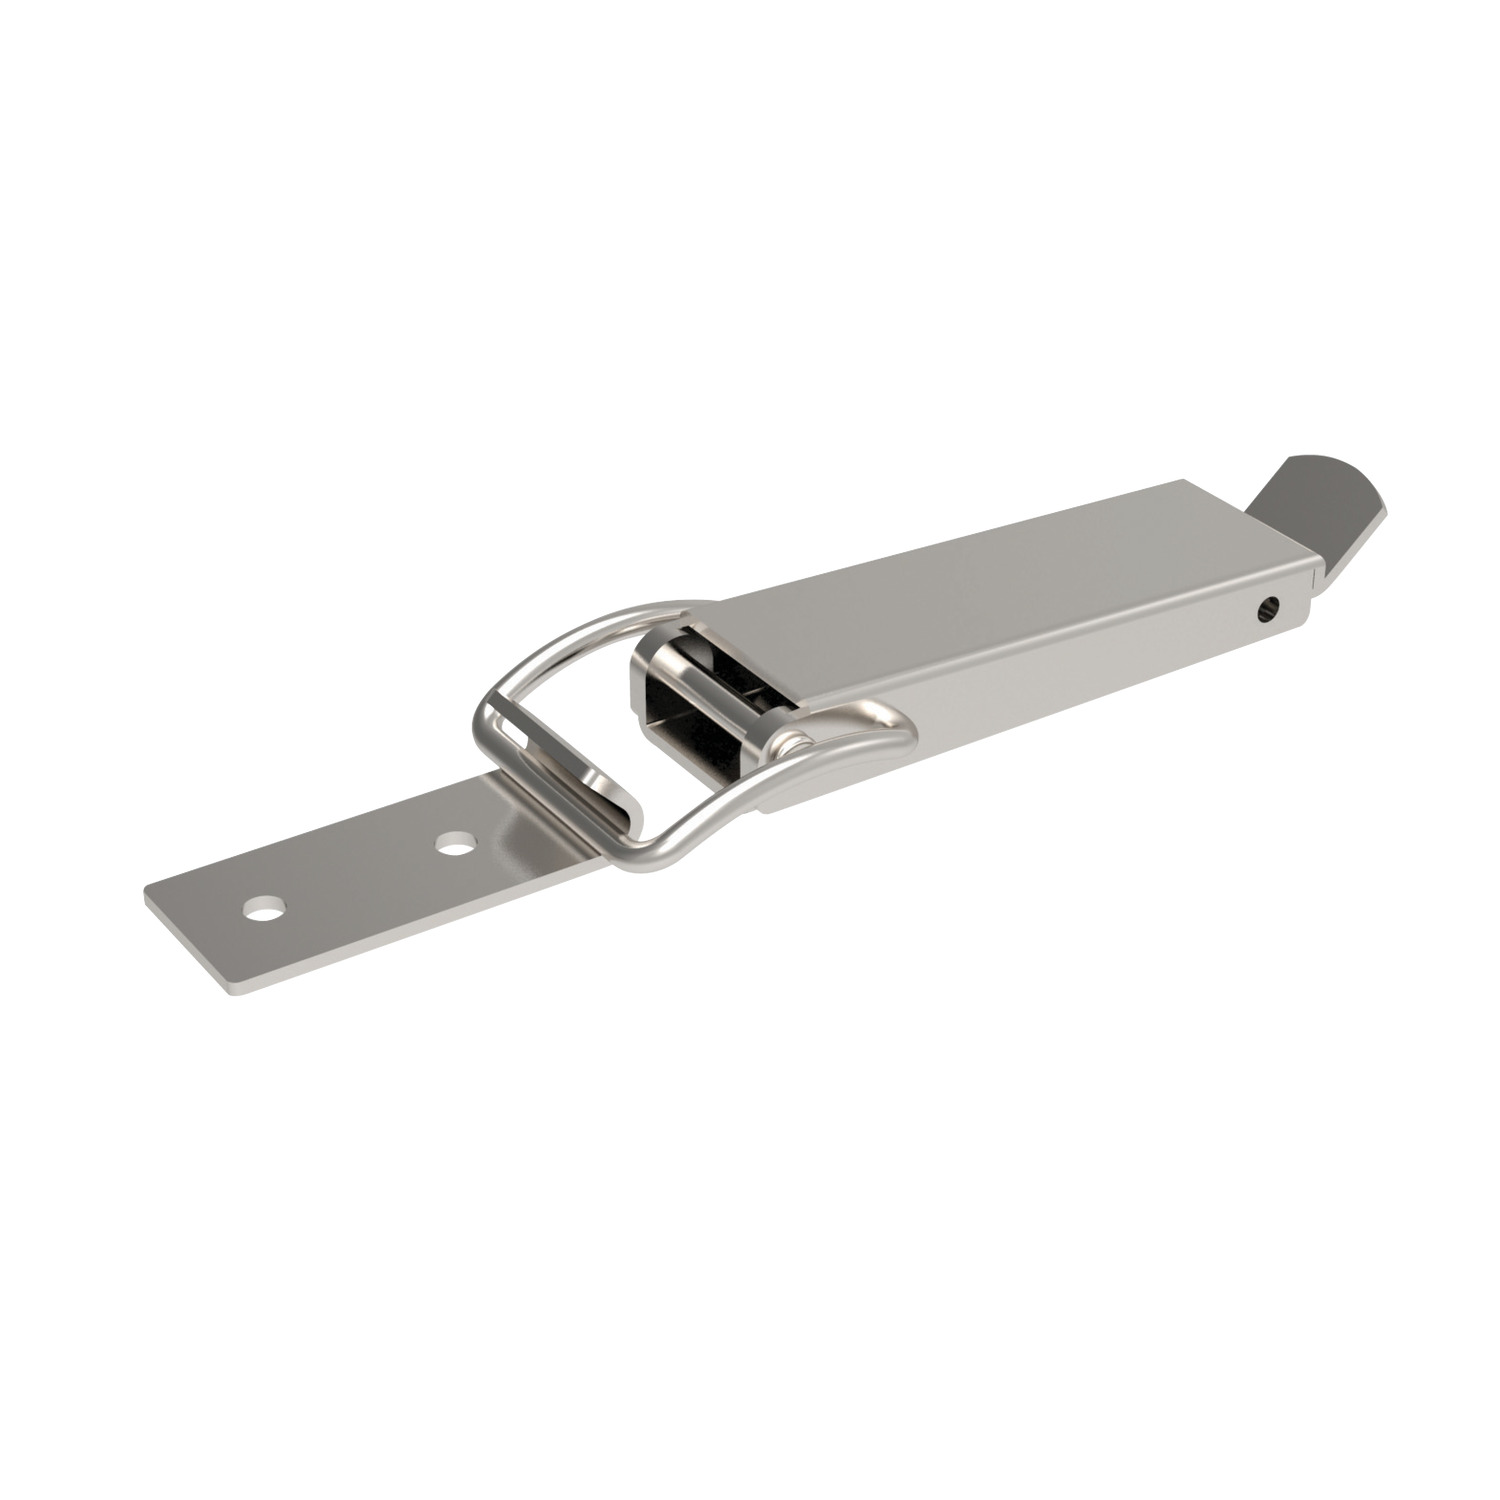 J0428.AC0030 Toggle Latches Stainless Steel - 140,5 - 12,5 - 34